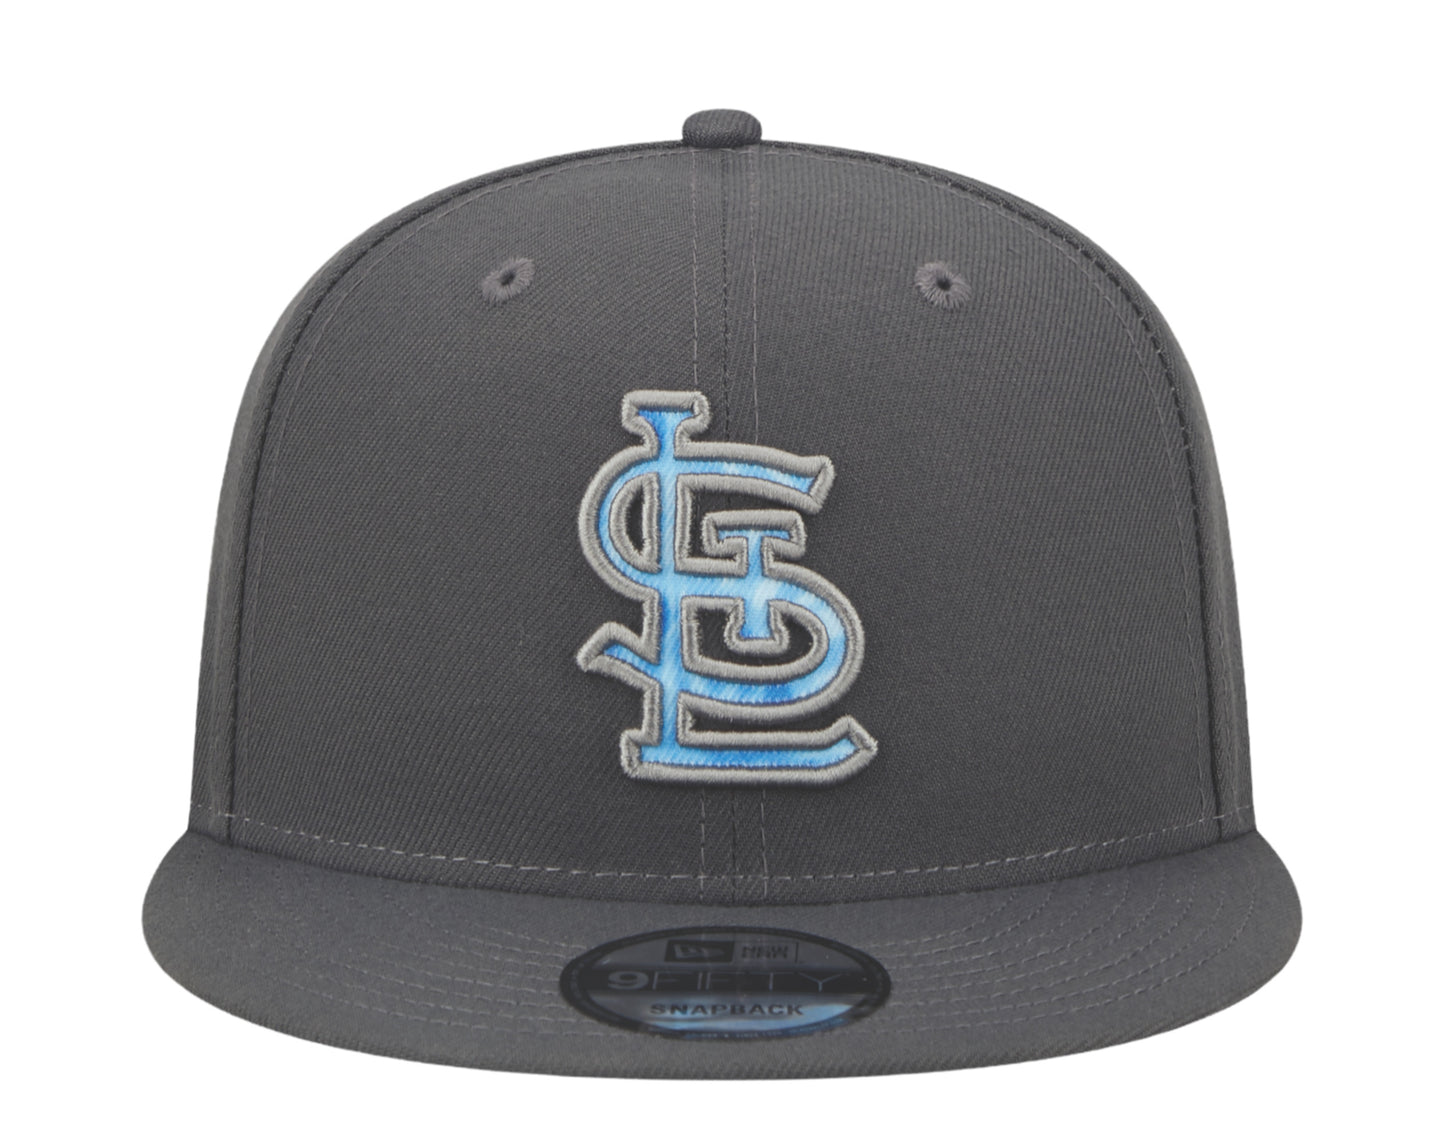 New Era 9Fifty MLB St. Louis Cardinals Father's Day Snapback Hat